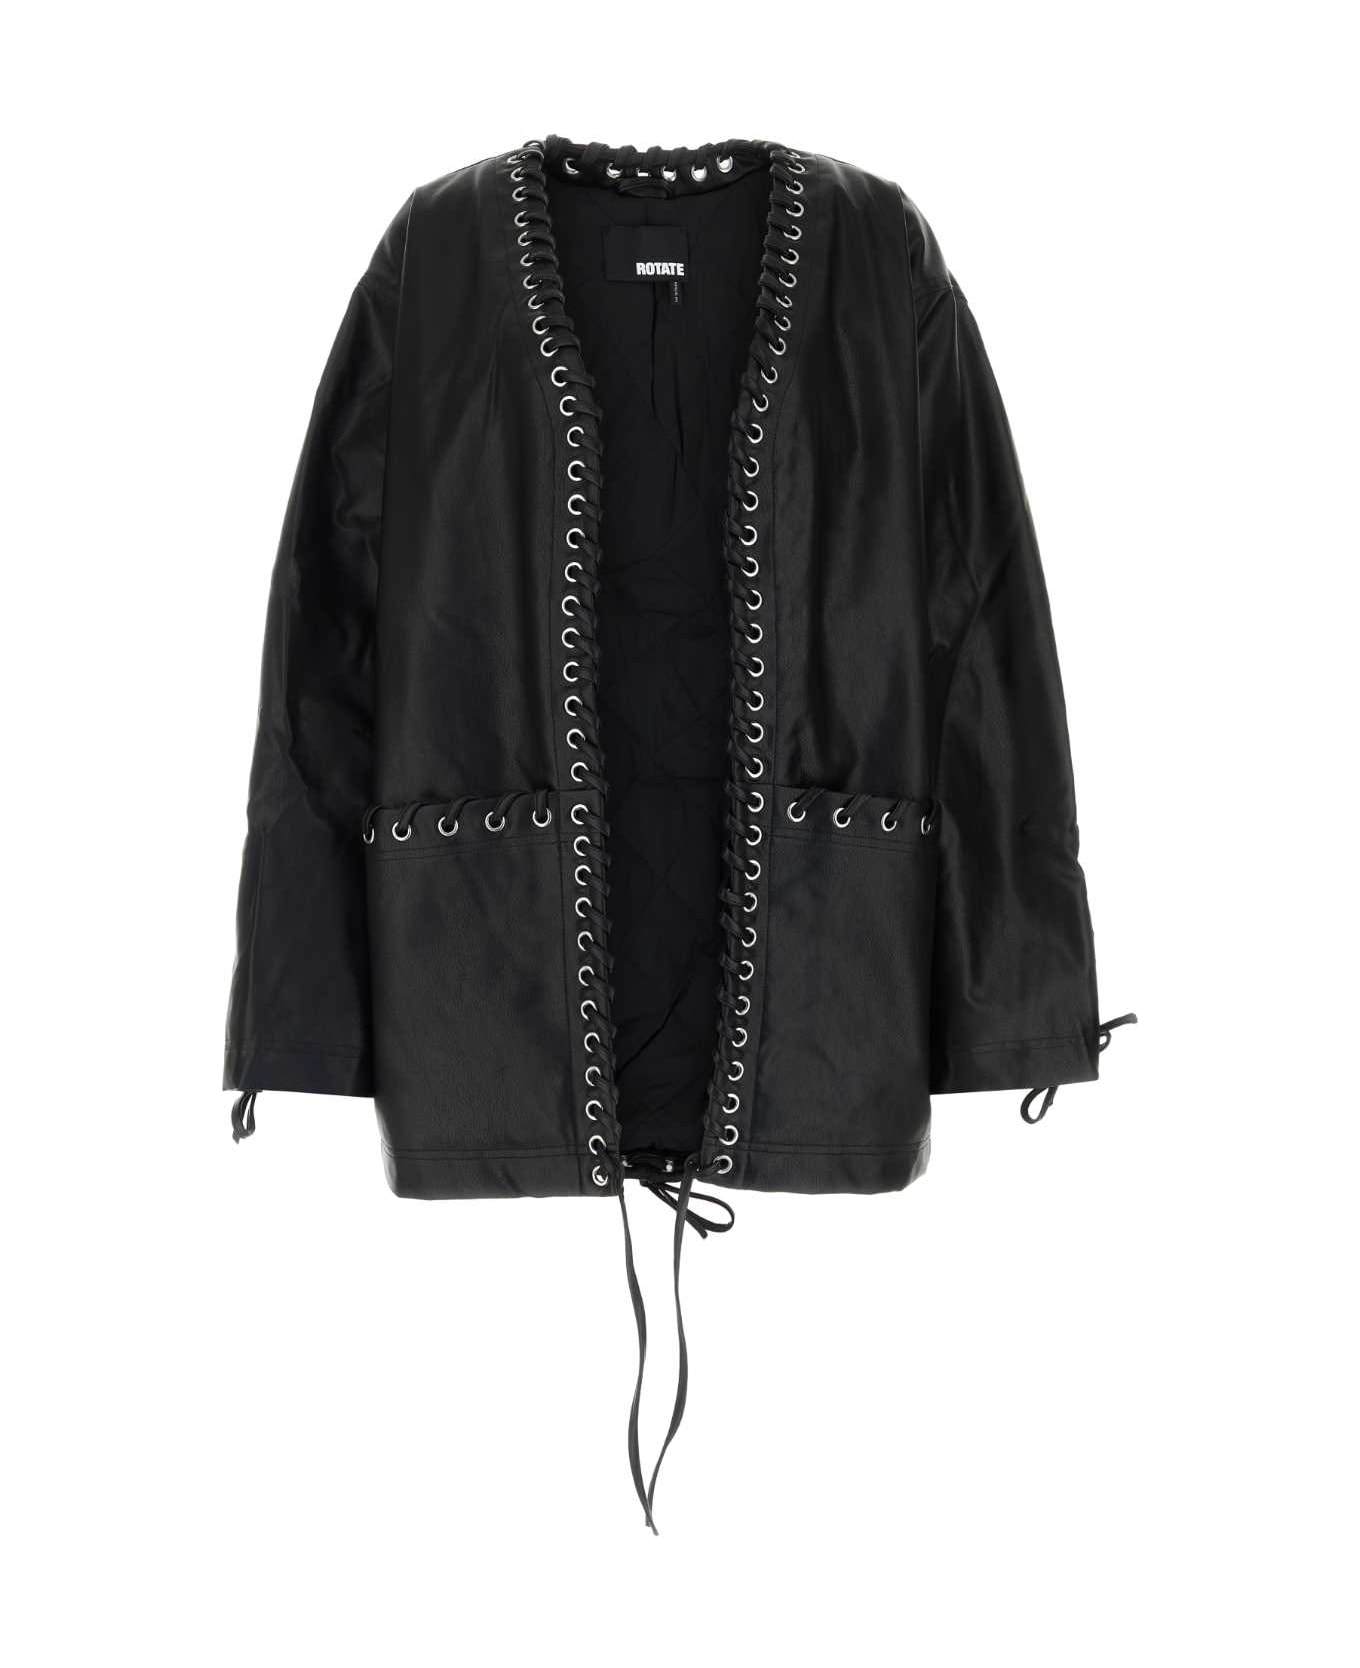 Rotate by Birger Christensen Black Synthetic Leather Jacket - BLACK